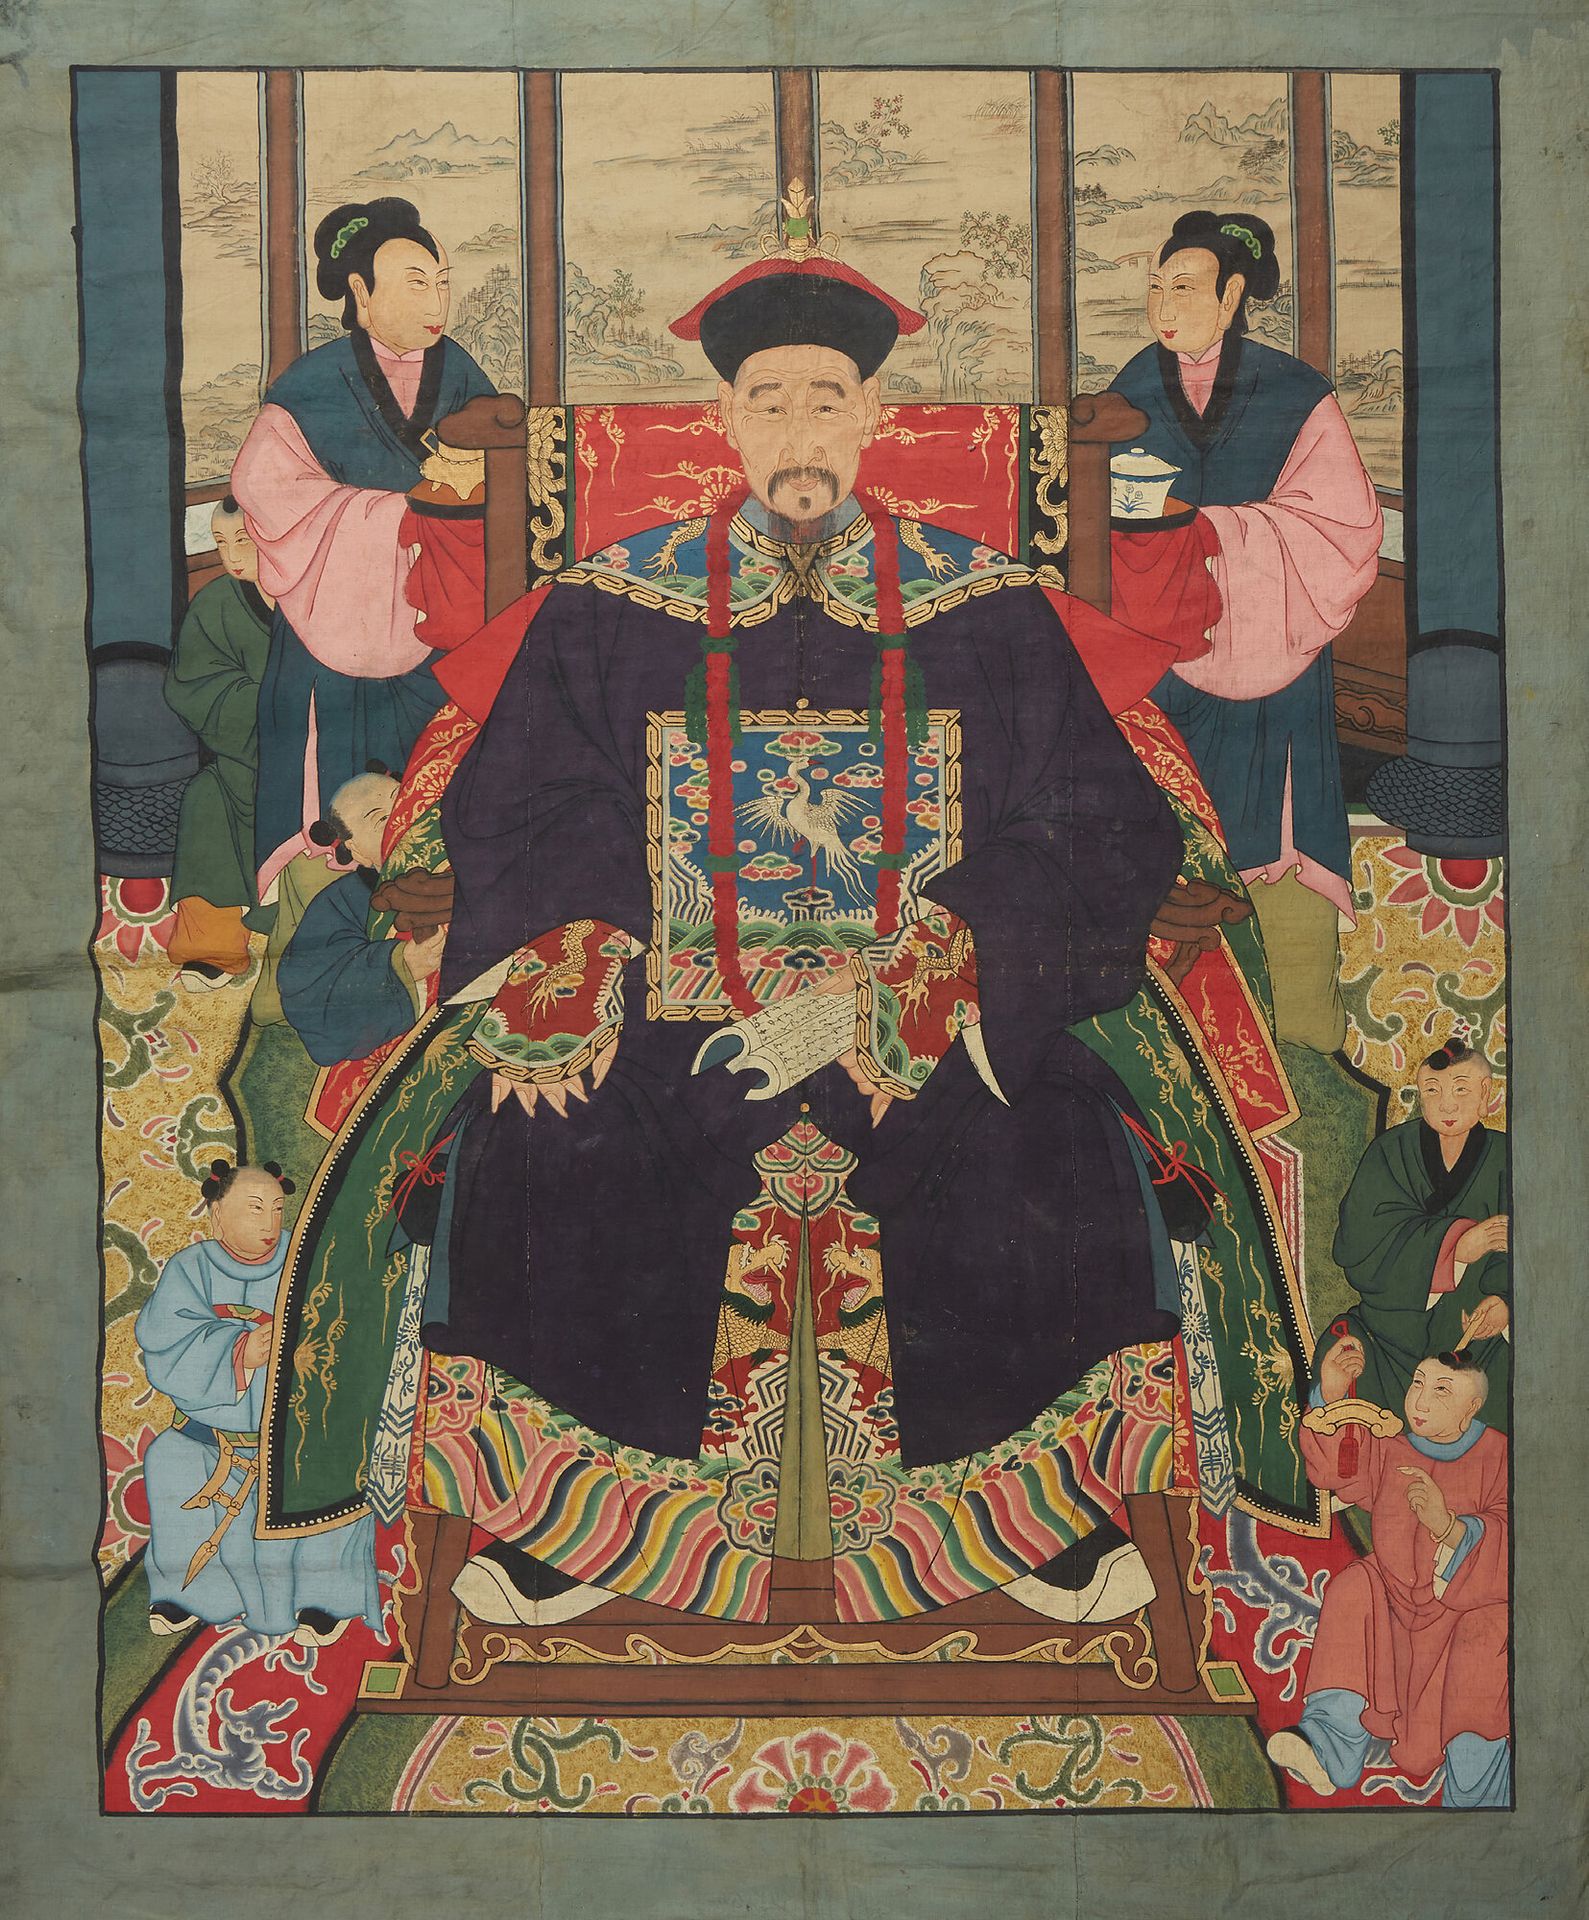 CHINE Large painting on canvas representing a dignitary.
Size: 205 x 155 cm